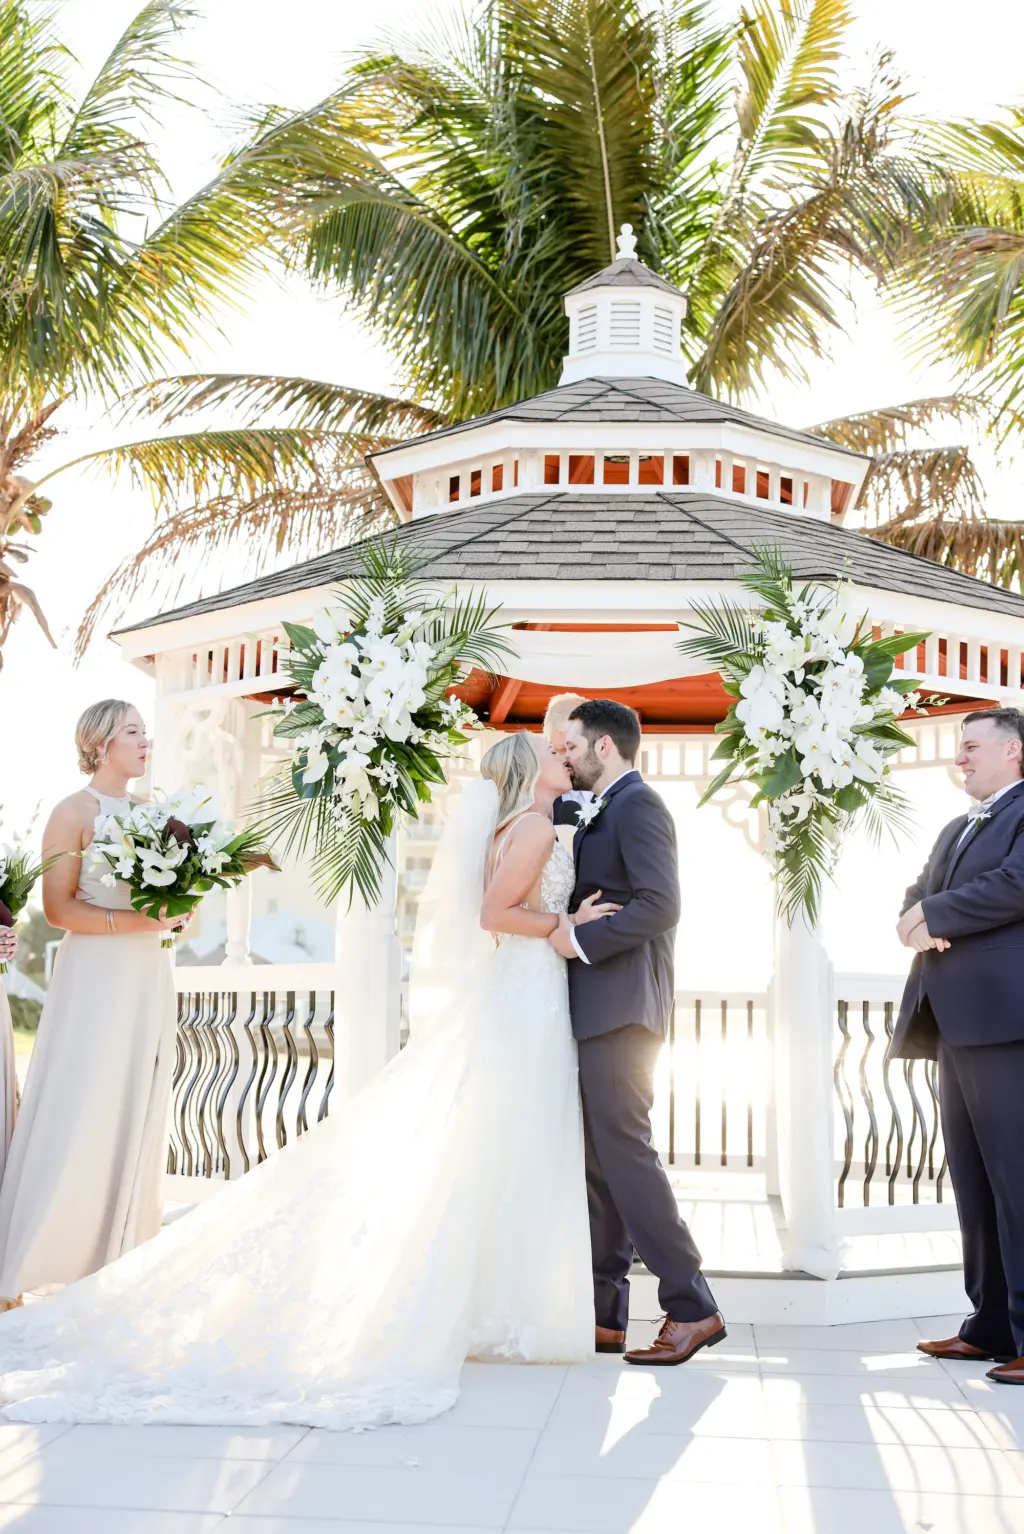 Bride an Groom First Kiss | Tropical Floral Sprays for Gazebo Wedding Ceremony Backdrop with White Orchids, Stock Flowers, and Palm Fronds Ideas | St Pete Videographer Shannon Kelly Films | Photographer Lifelong Photography Studio | Planner Coastal Coordinating | Venue Isla del Sol Yacht Club